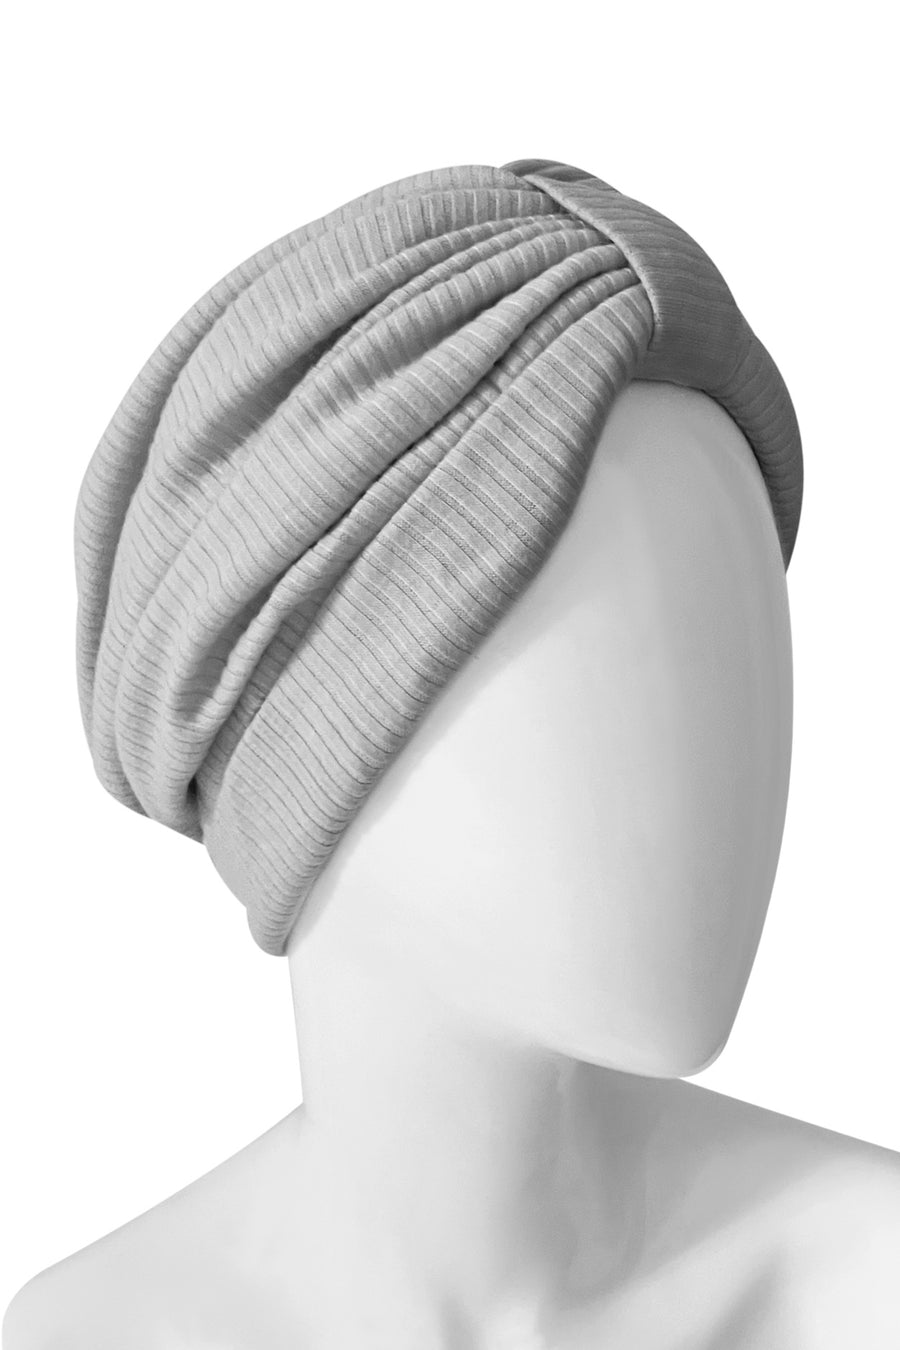 GENTILLY - NEW TURBAN LINEN WITH SATIN !